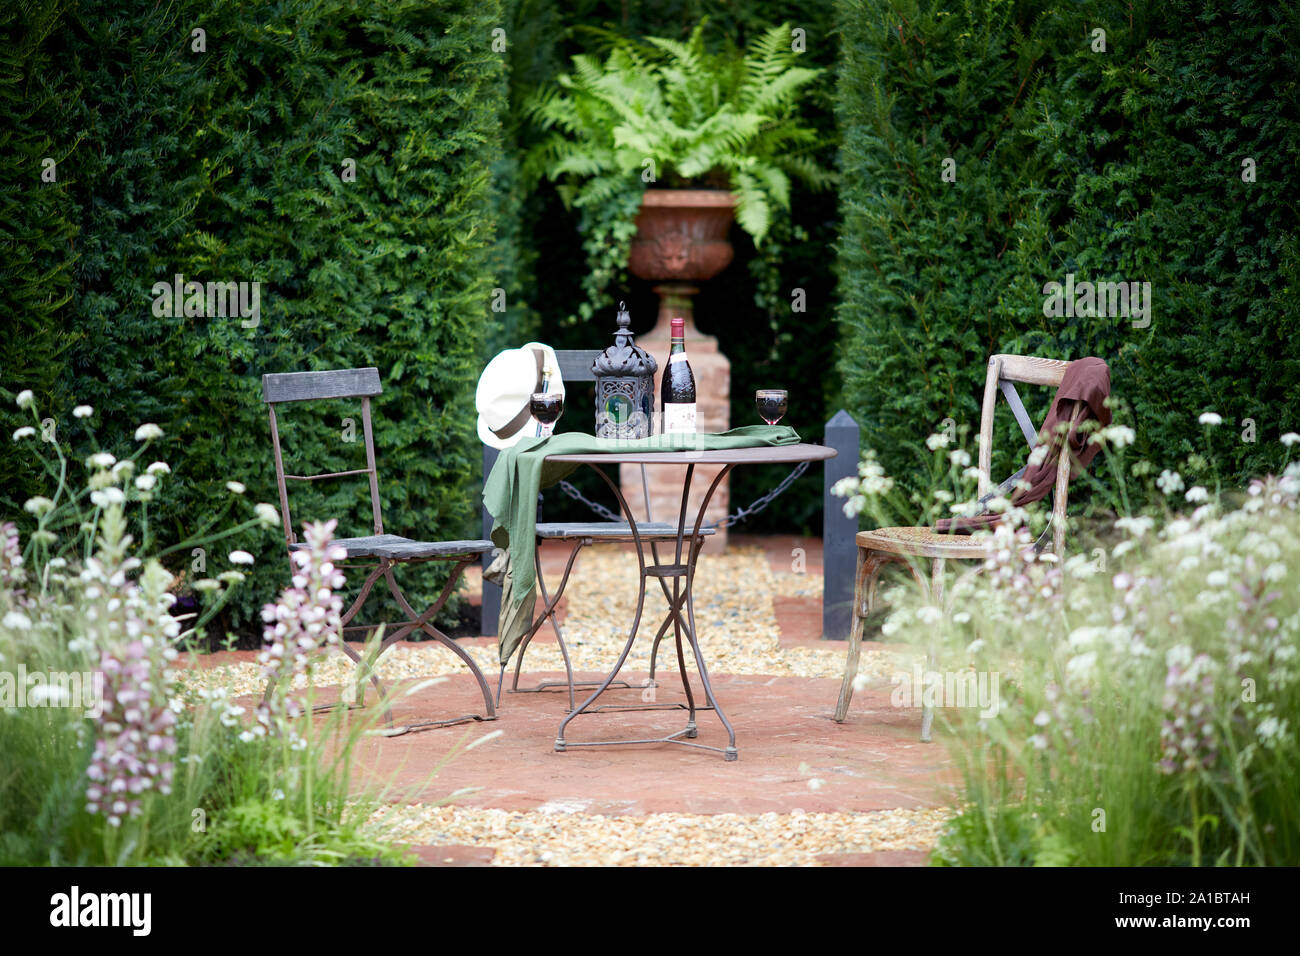 Typical english garden with small table and outdoor chairs seating area Stock Photo